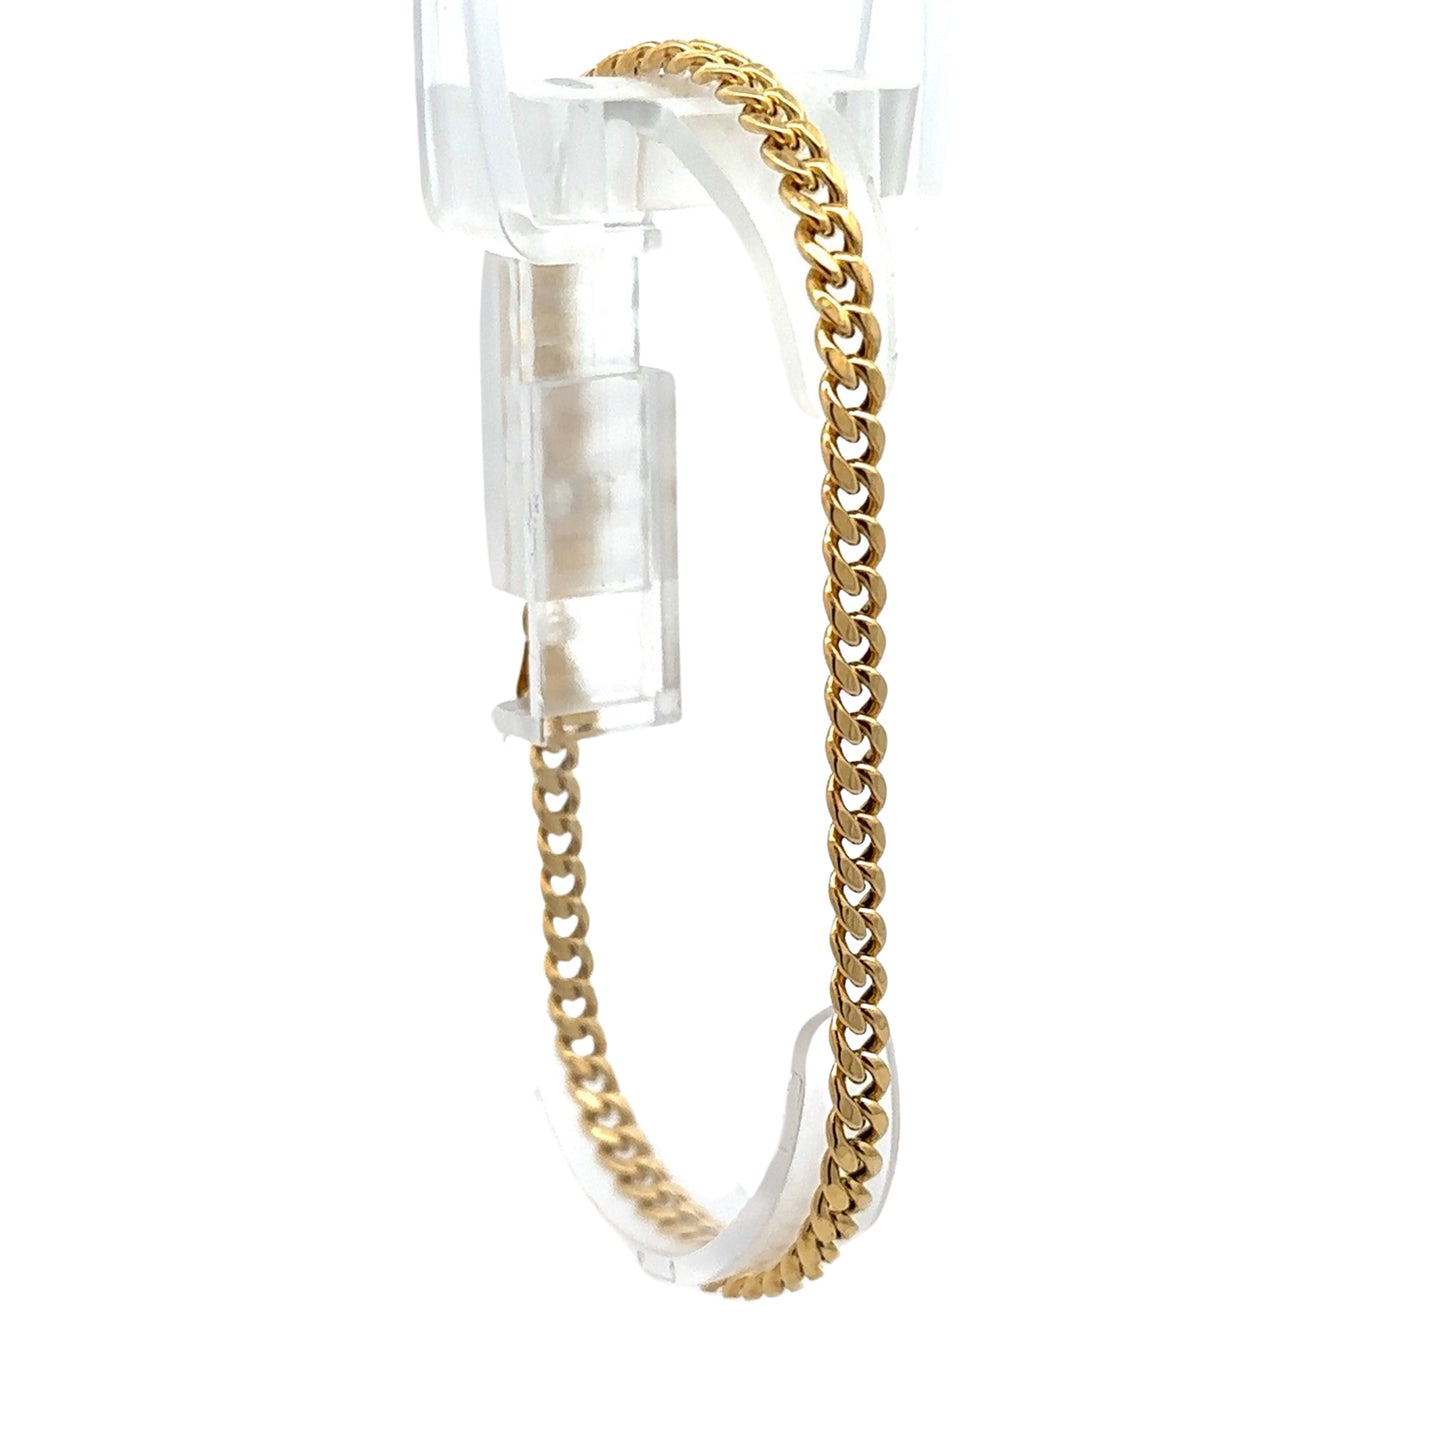 Diagonal view of yellow gold curb link bracelet